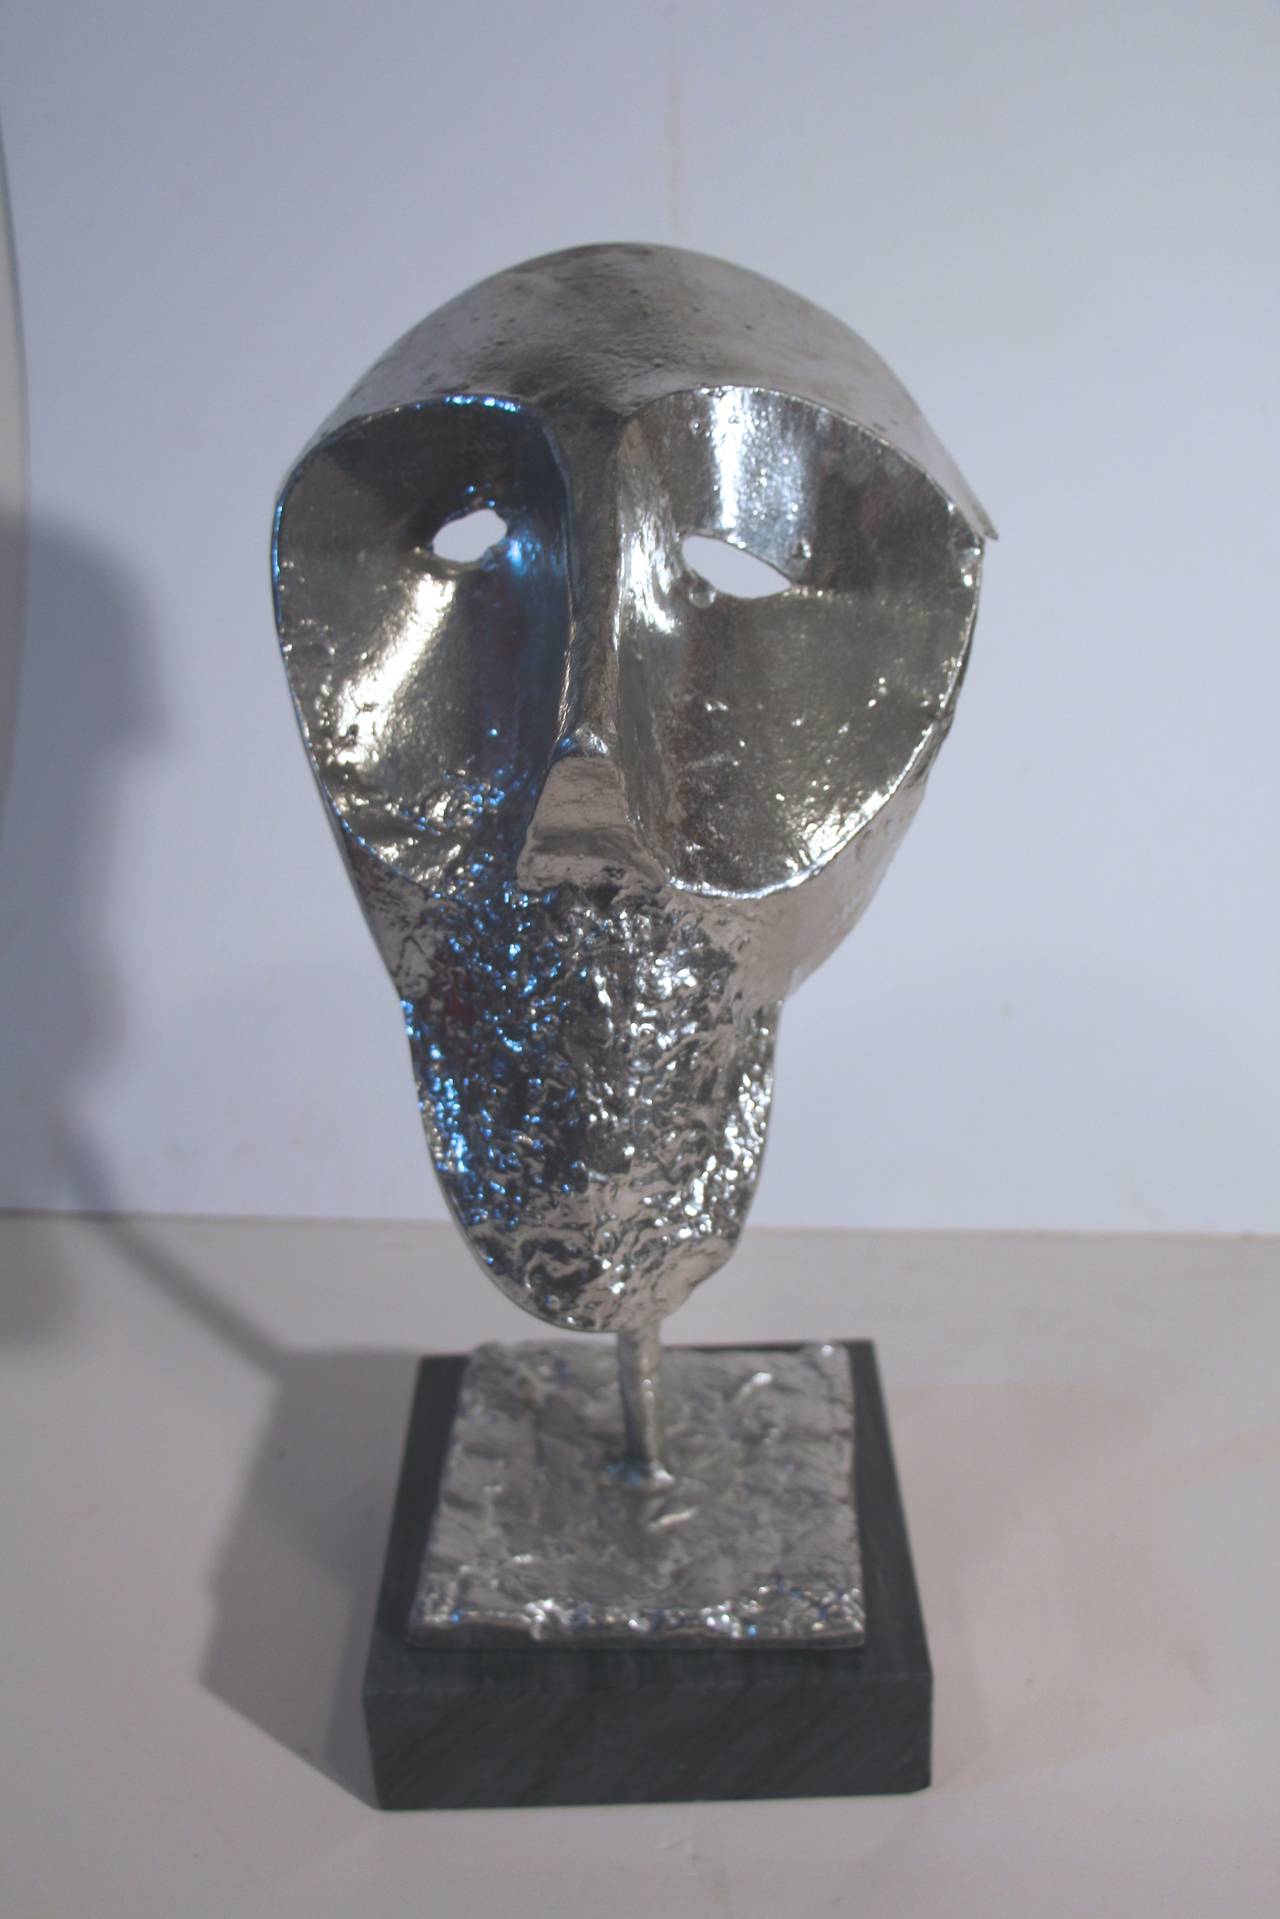 An unusual and intriguing case heavy metal bust mounted on a marble base. Well executed but no apparent signature.